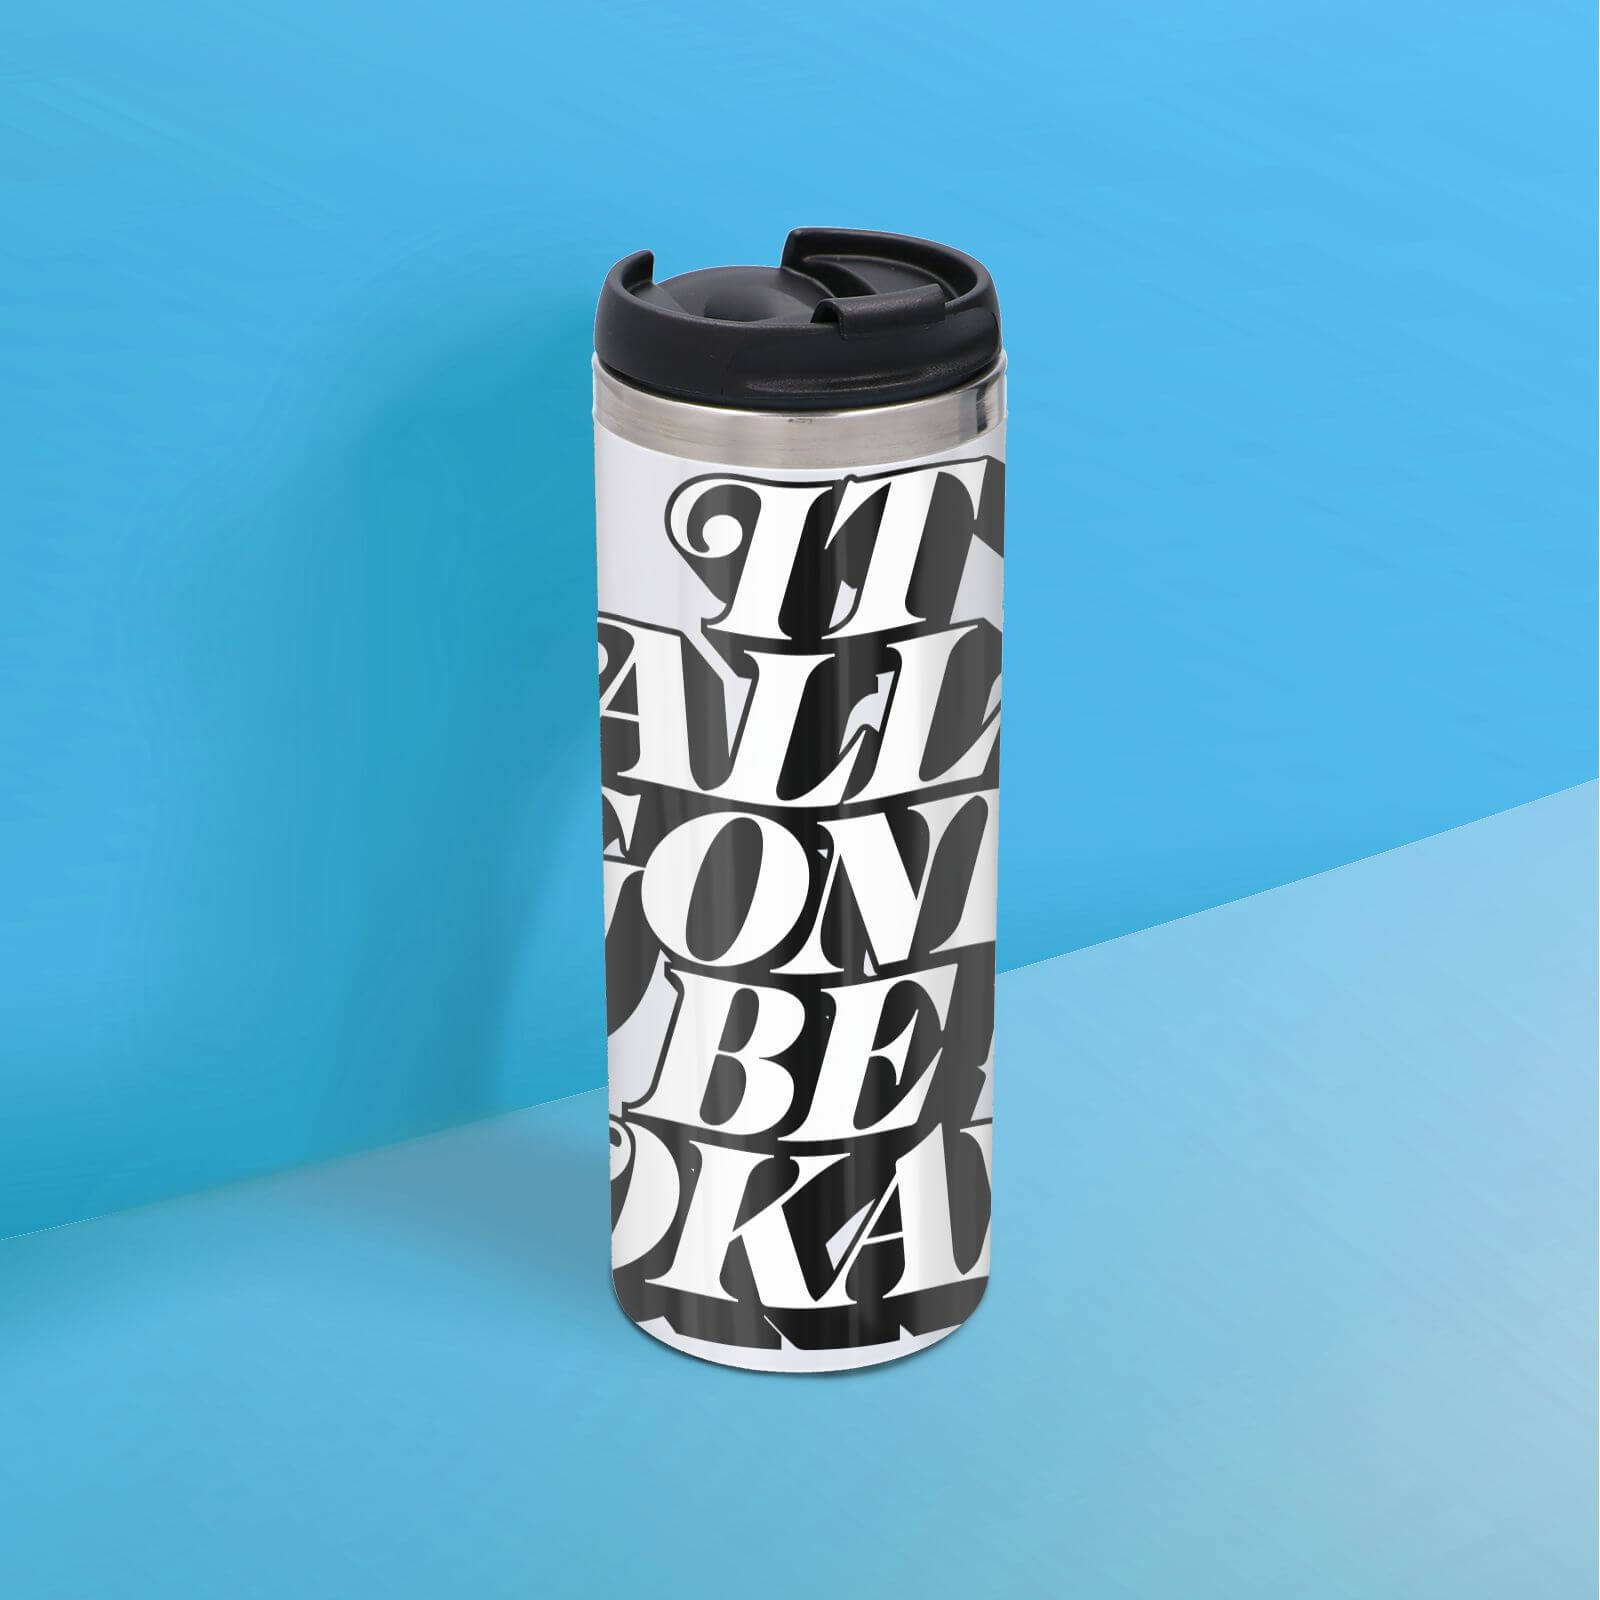 The Motivated Type It All Gone Be Okay Thermo Travel Mug